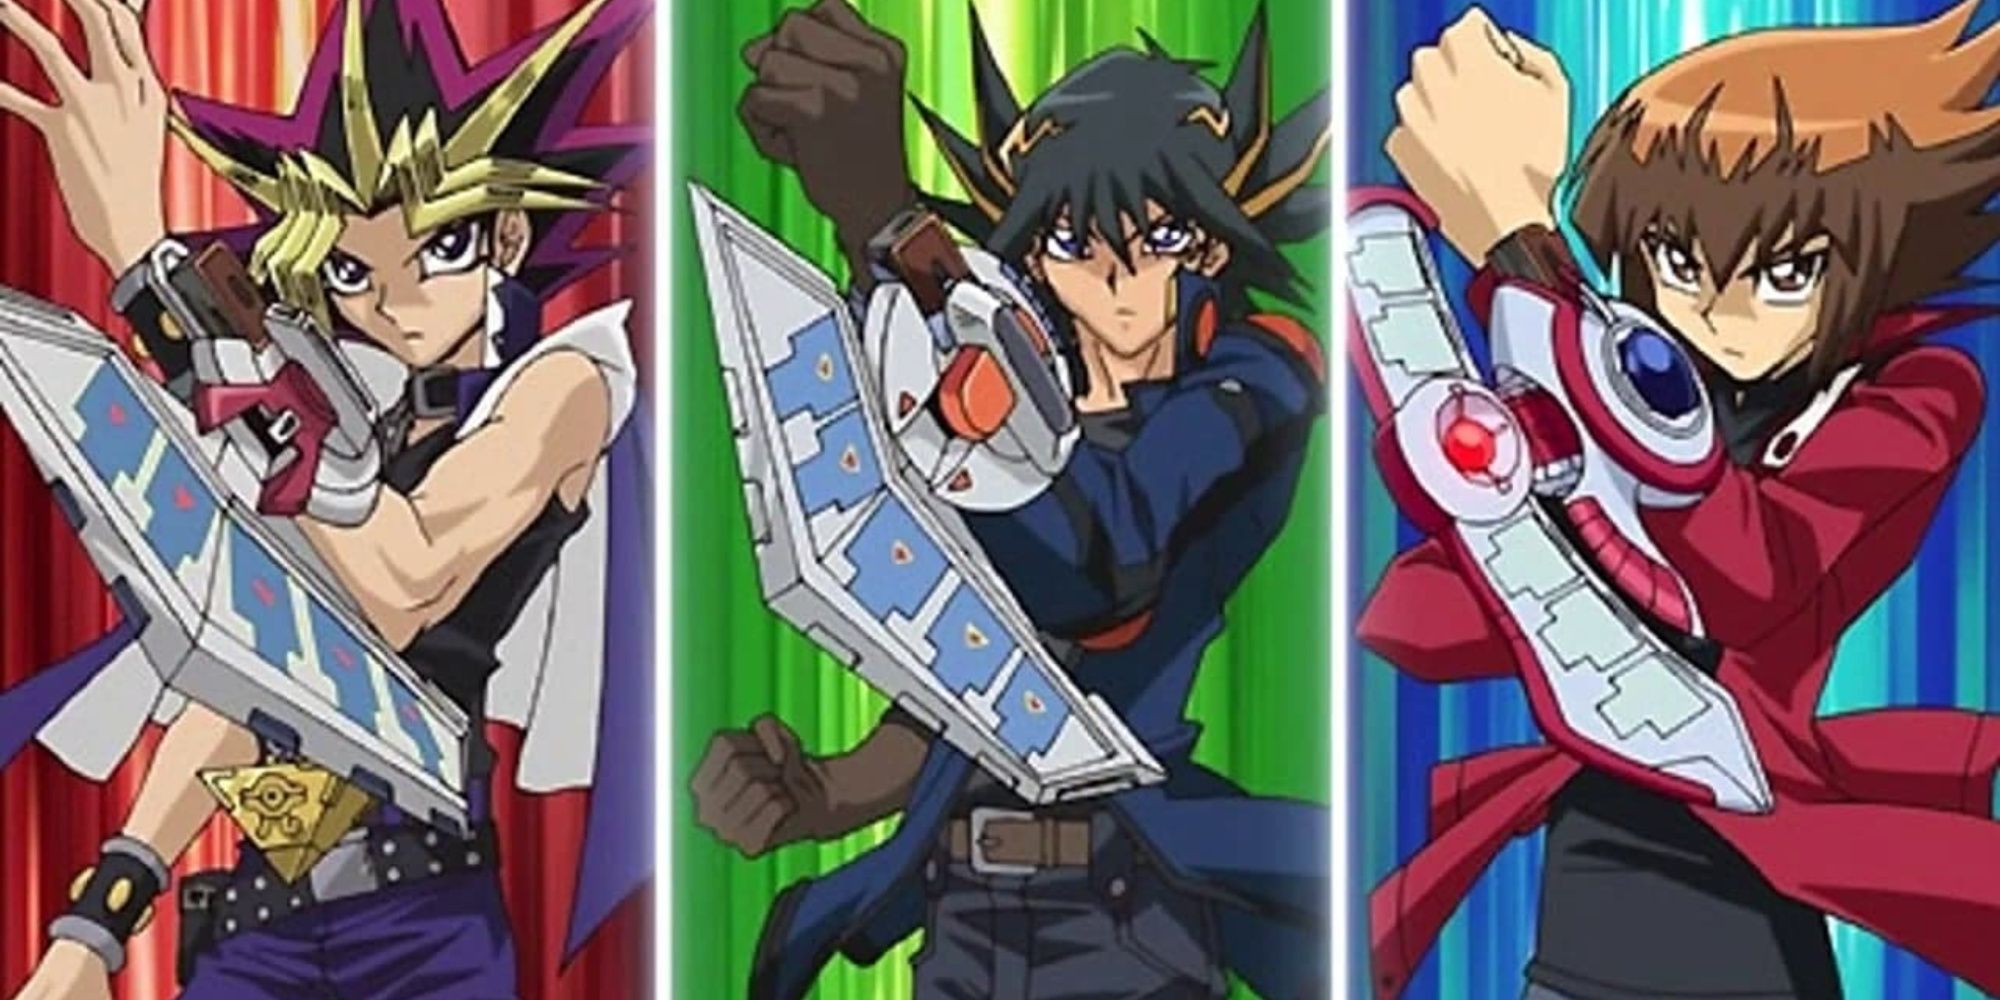 Yu-Gi-Oh! Anime Games Aren't Dead Yet - Here's Why